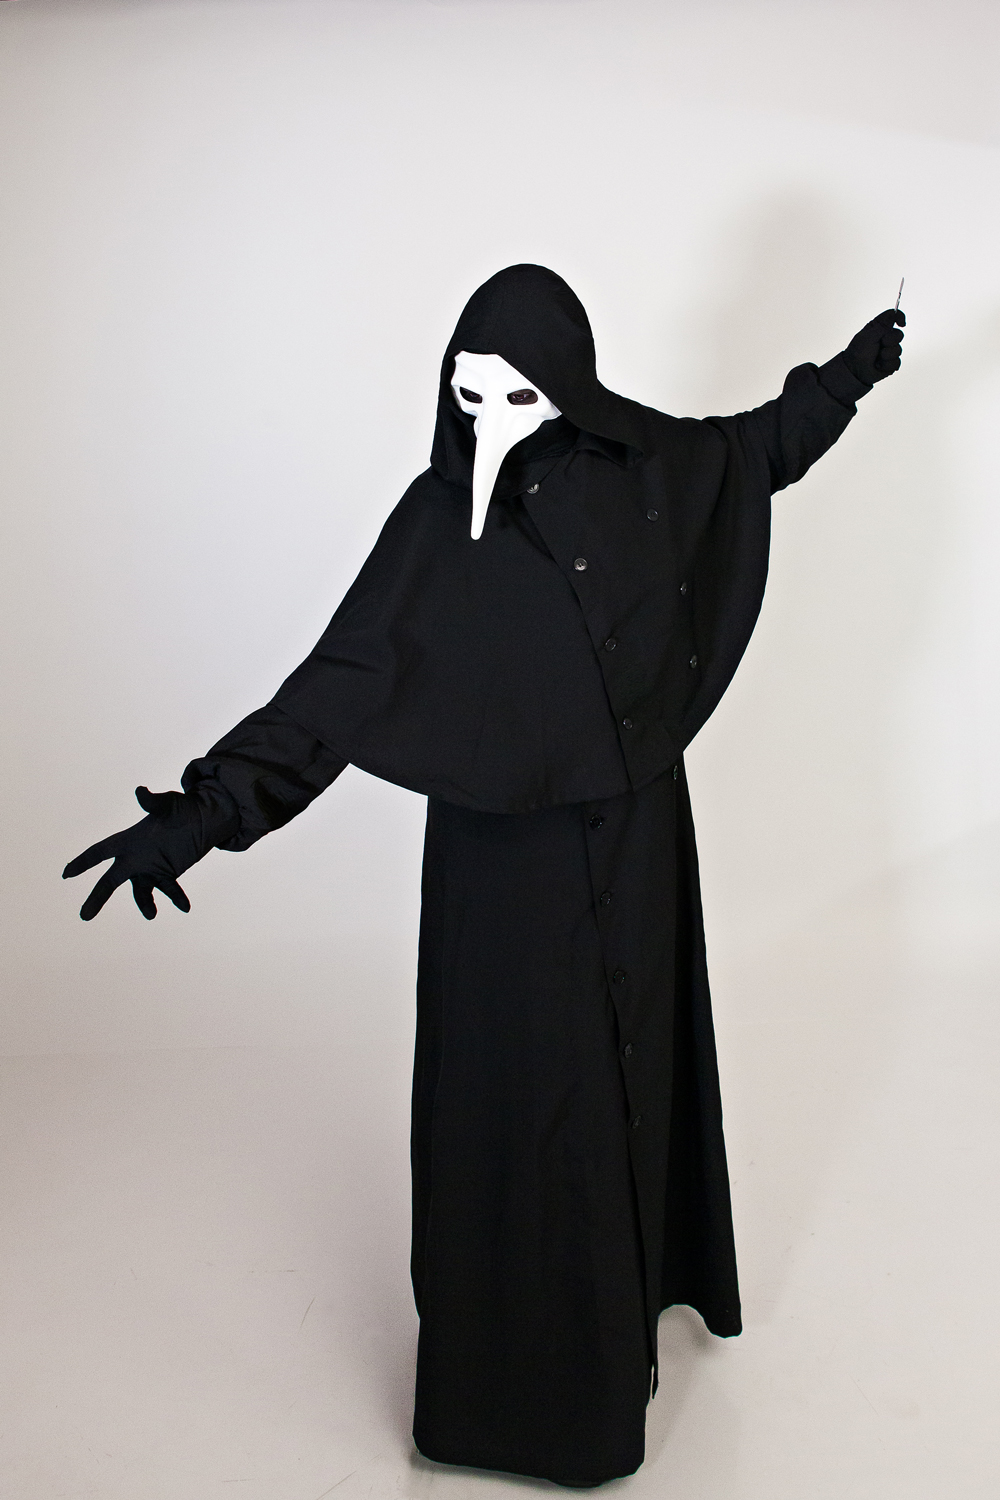 Scp Foundation Scp 049 Plague Doctor Cosplay 2 By Ladyendora On Deviantart